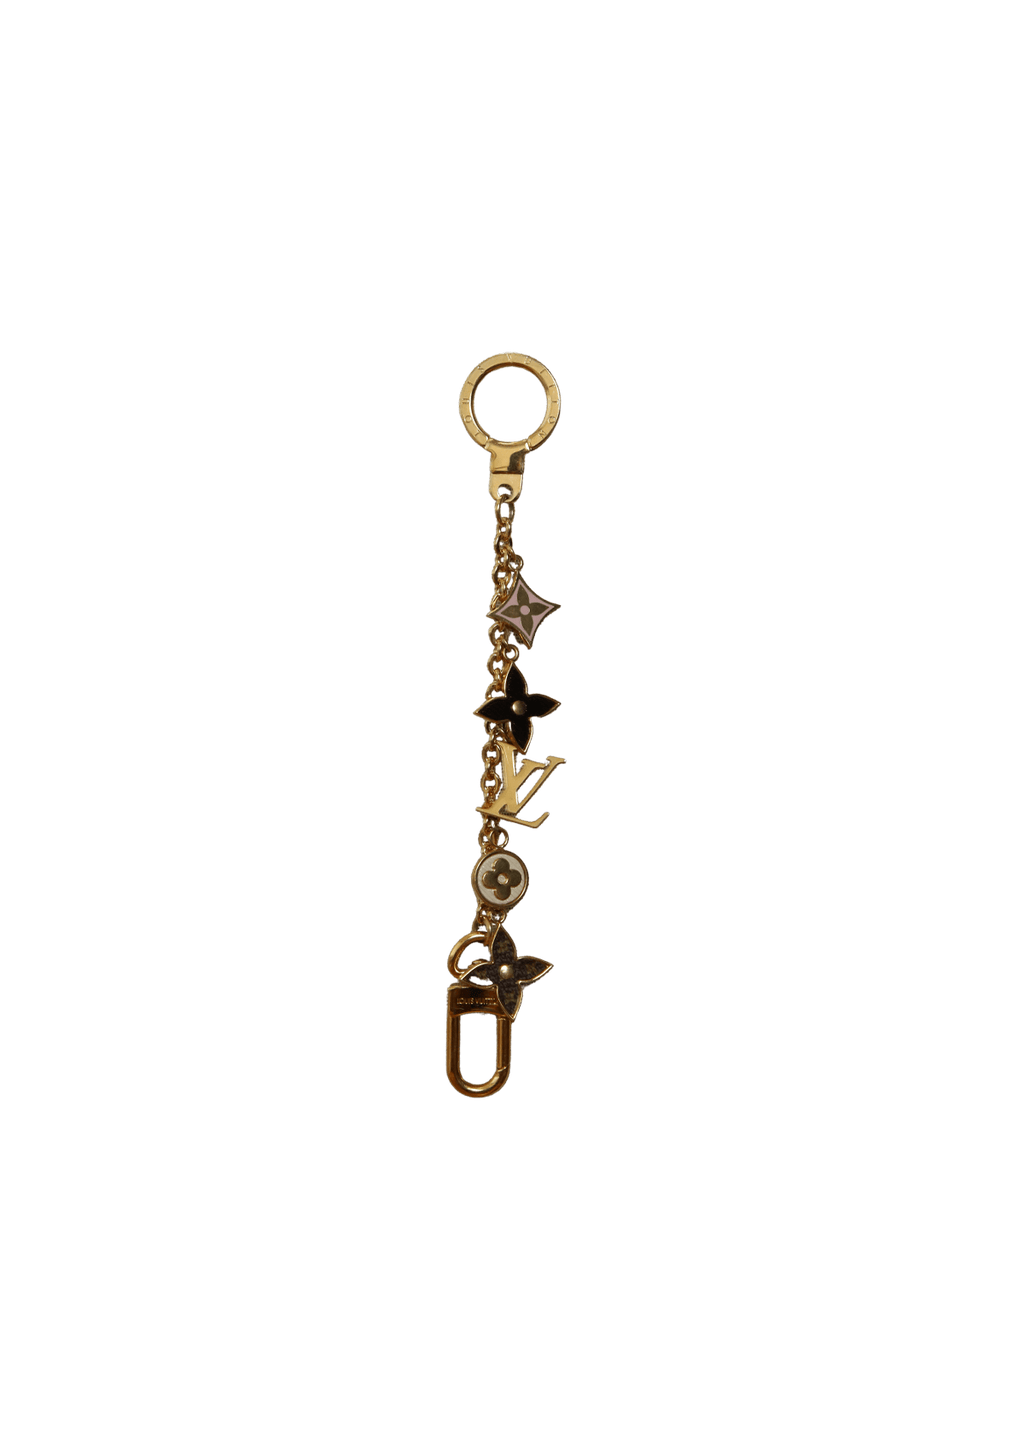 Louis Vuitton Spring Street Chain Bag Charm, Gold, One Size